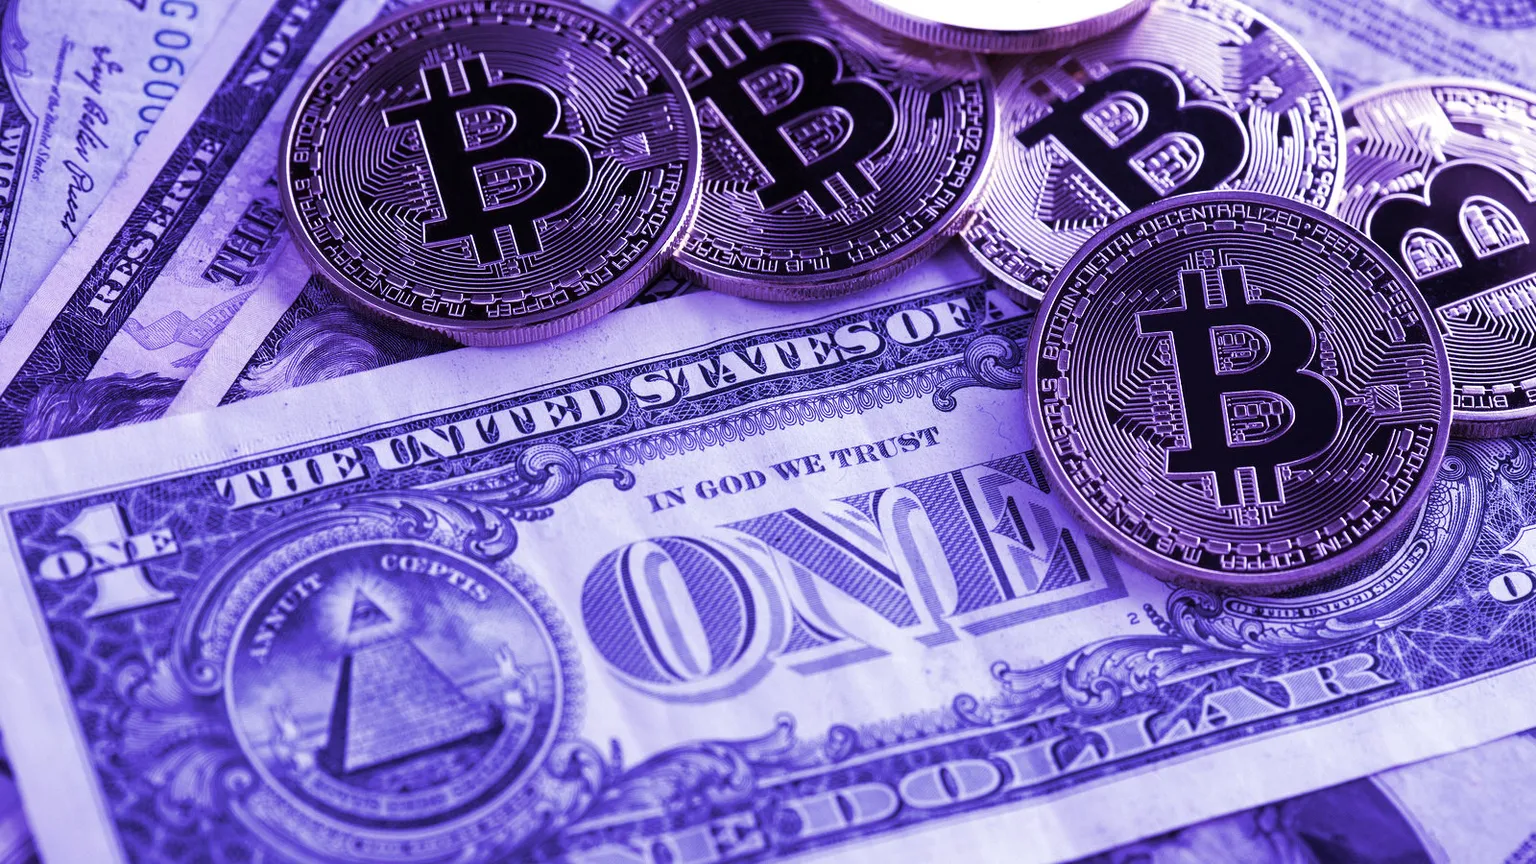 Bitcoin and dollars. Image: Shutterstock